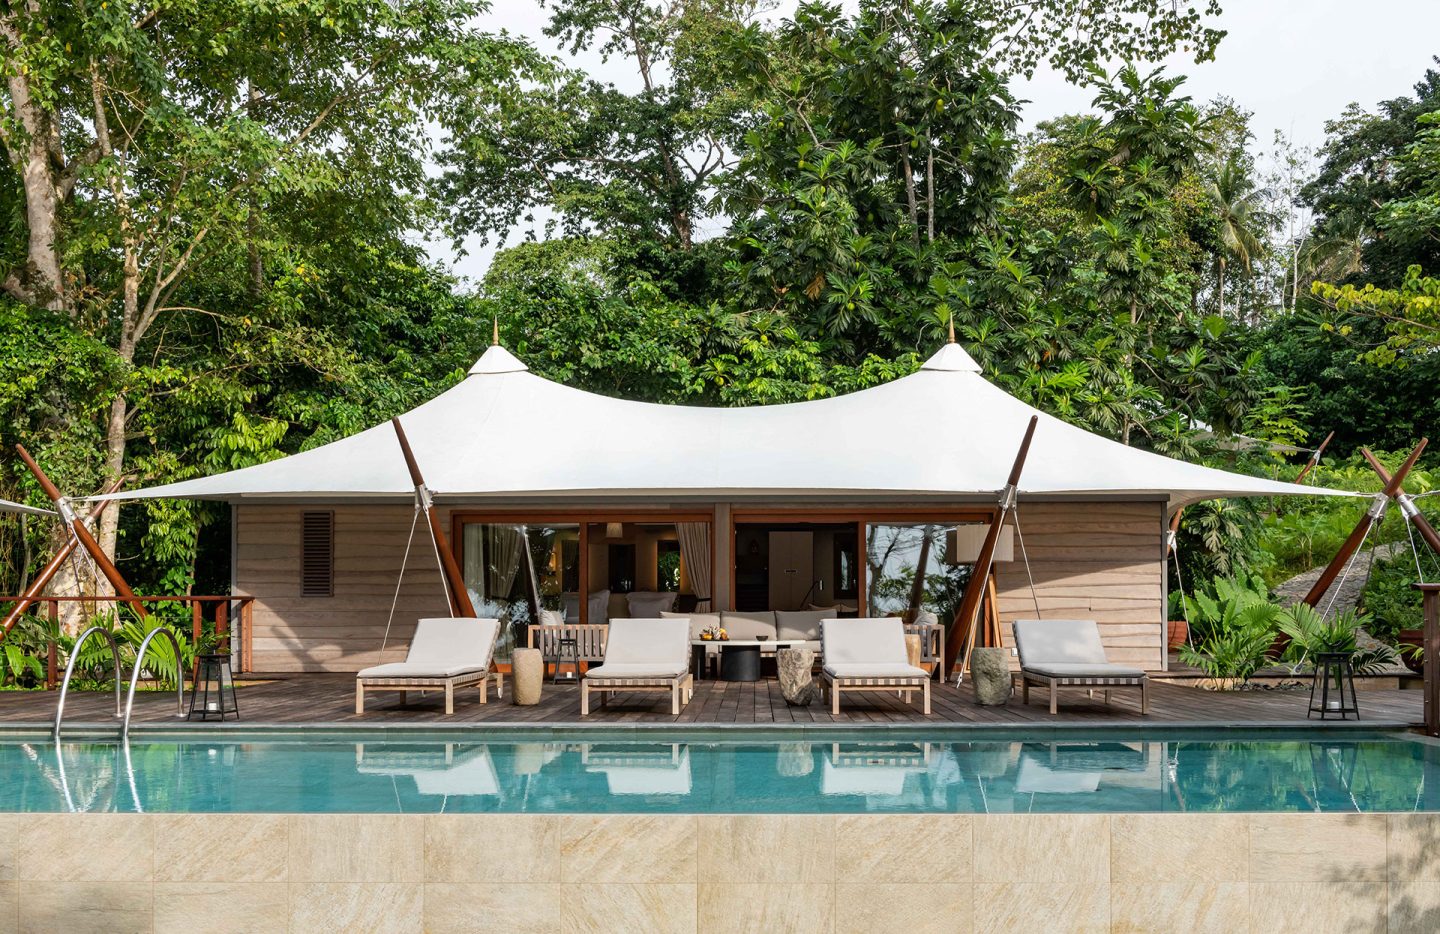 Praia Sundy: A pristine, secluded, tented camp sitting between the rainforest and ocean.